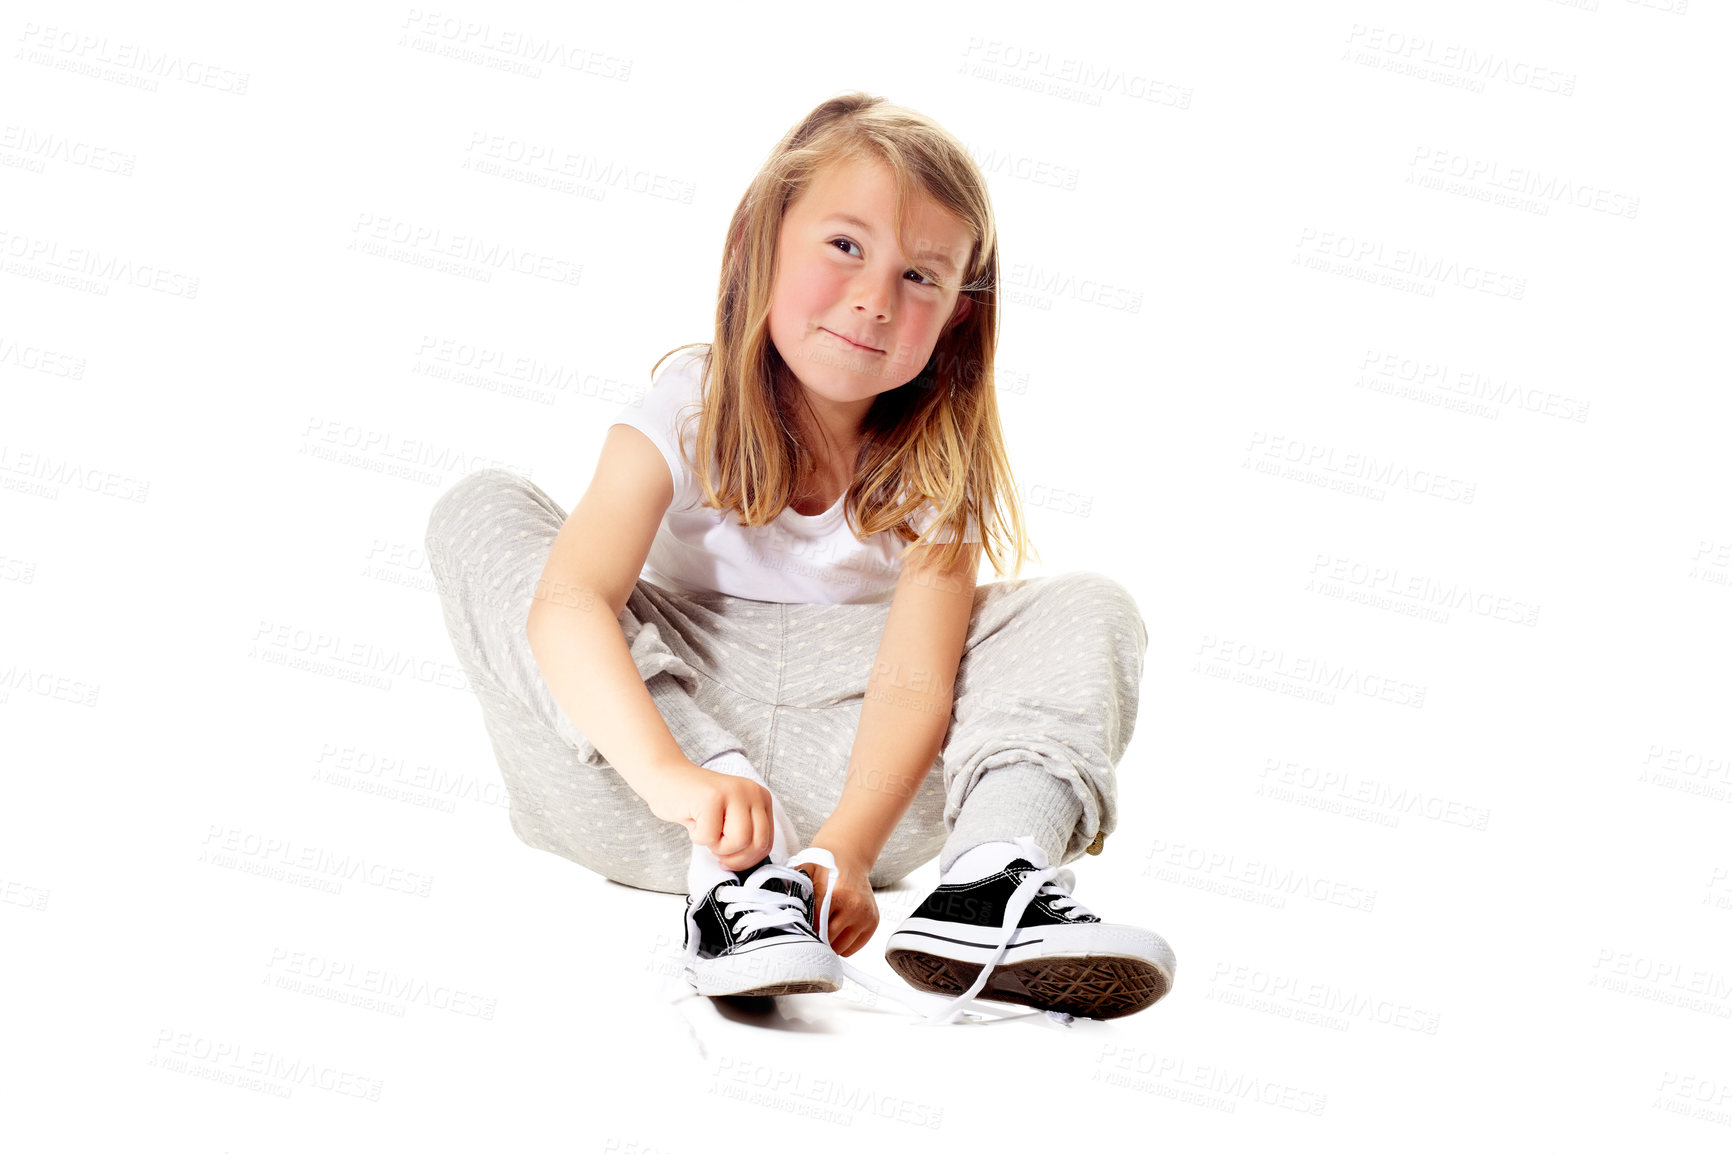 Buy stock photo Shot of a cute little girl isolated on white